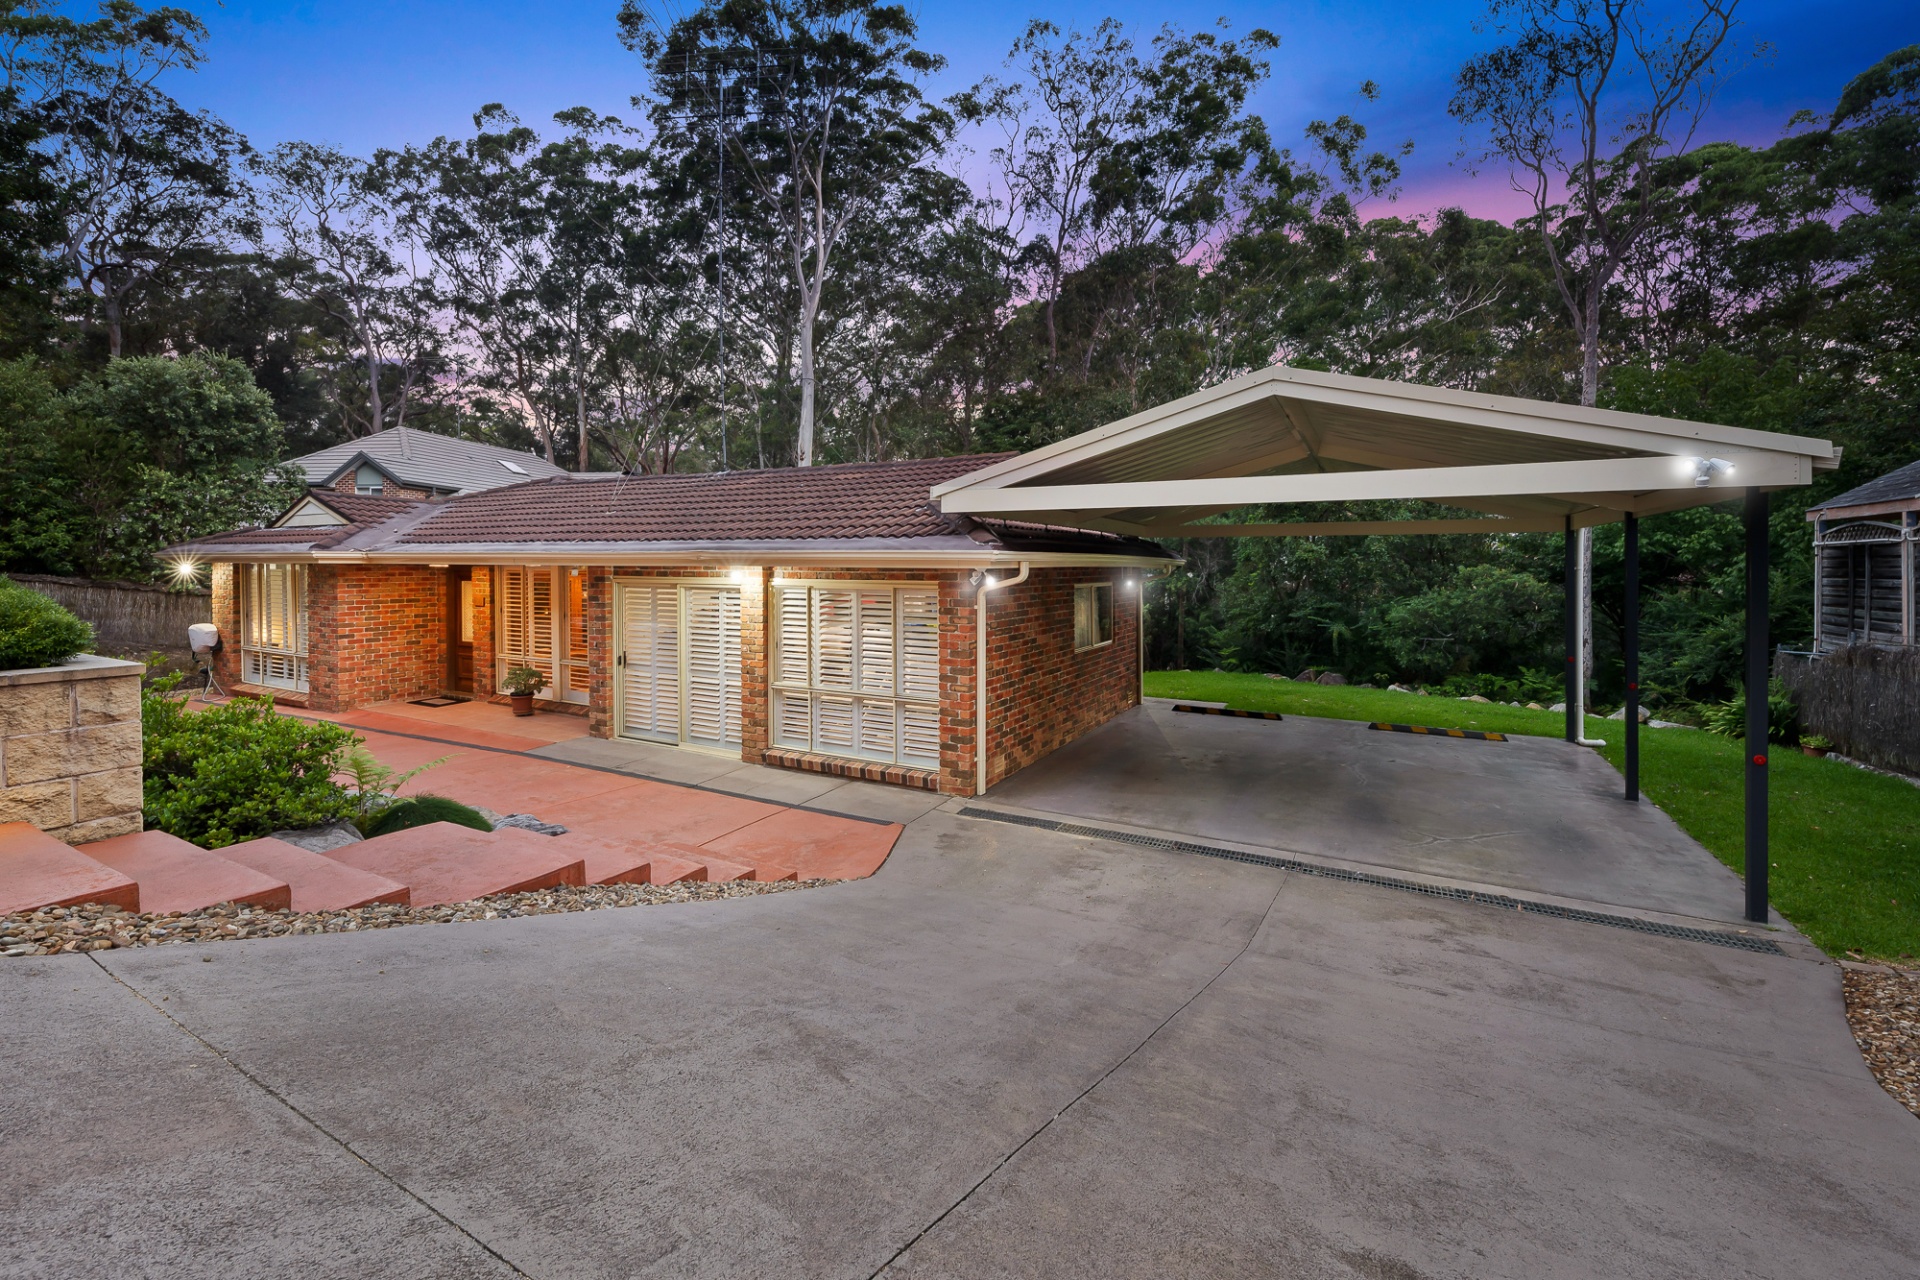 4 Rooms, House, For Sale, Caber Close, 2 Bathrooms, Listing ID 1669, Dural, NSW, Australia,